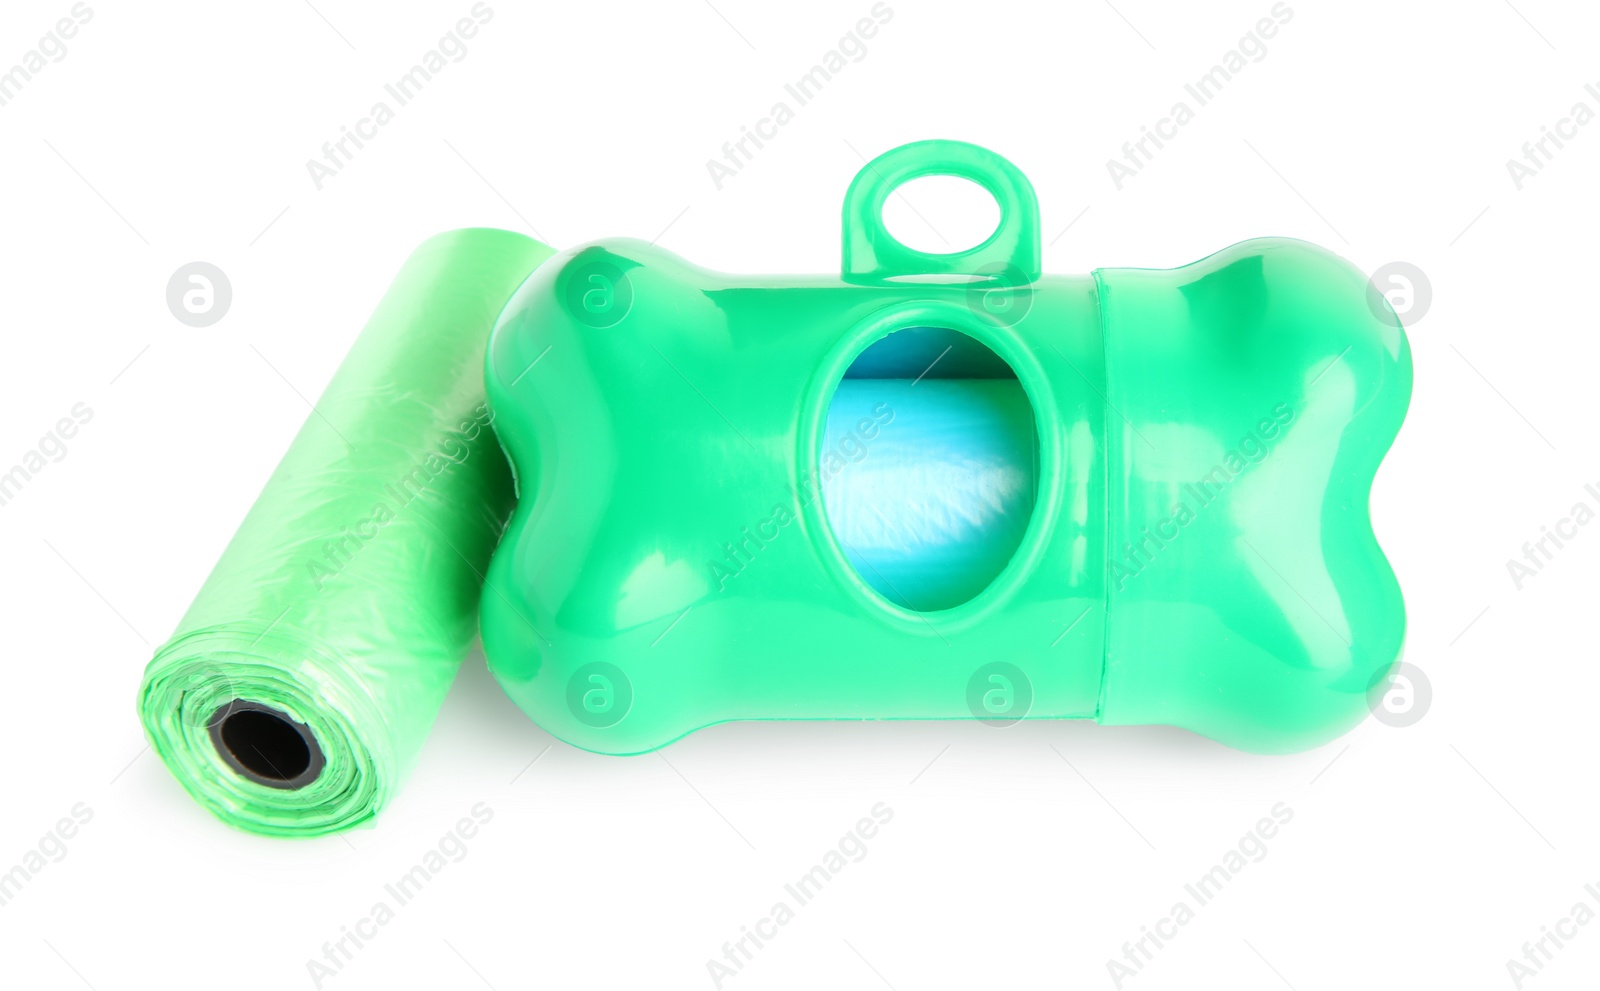 Photo of Rolls of dog poop bags and holder isolated on white